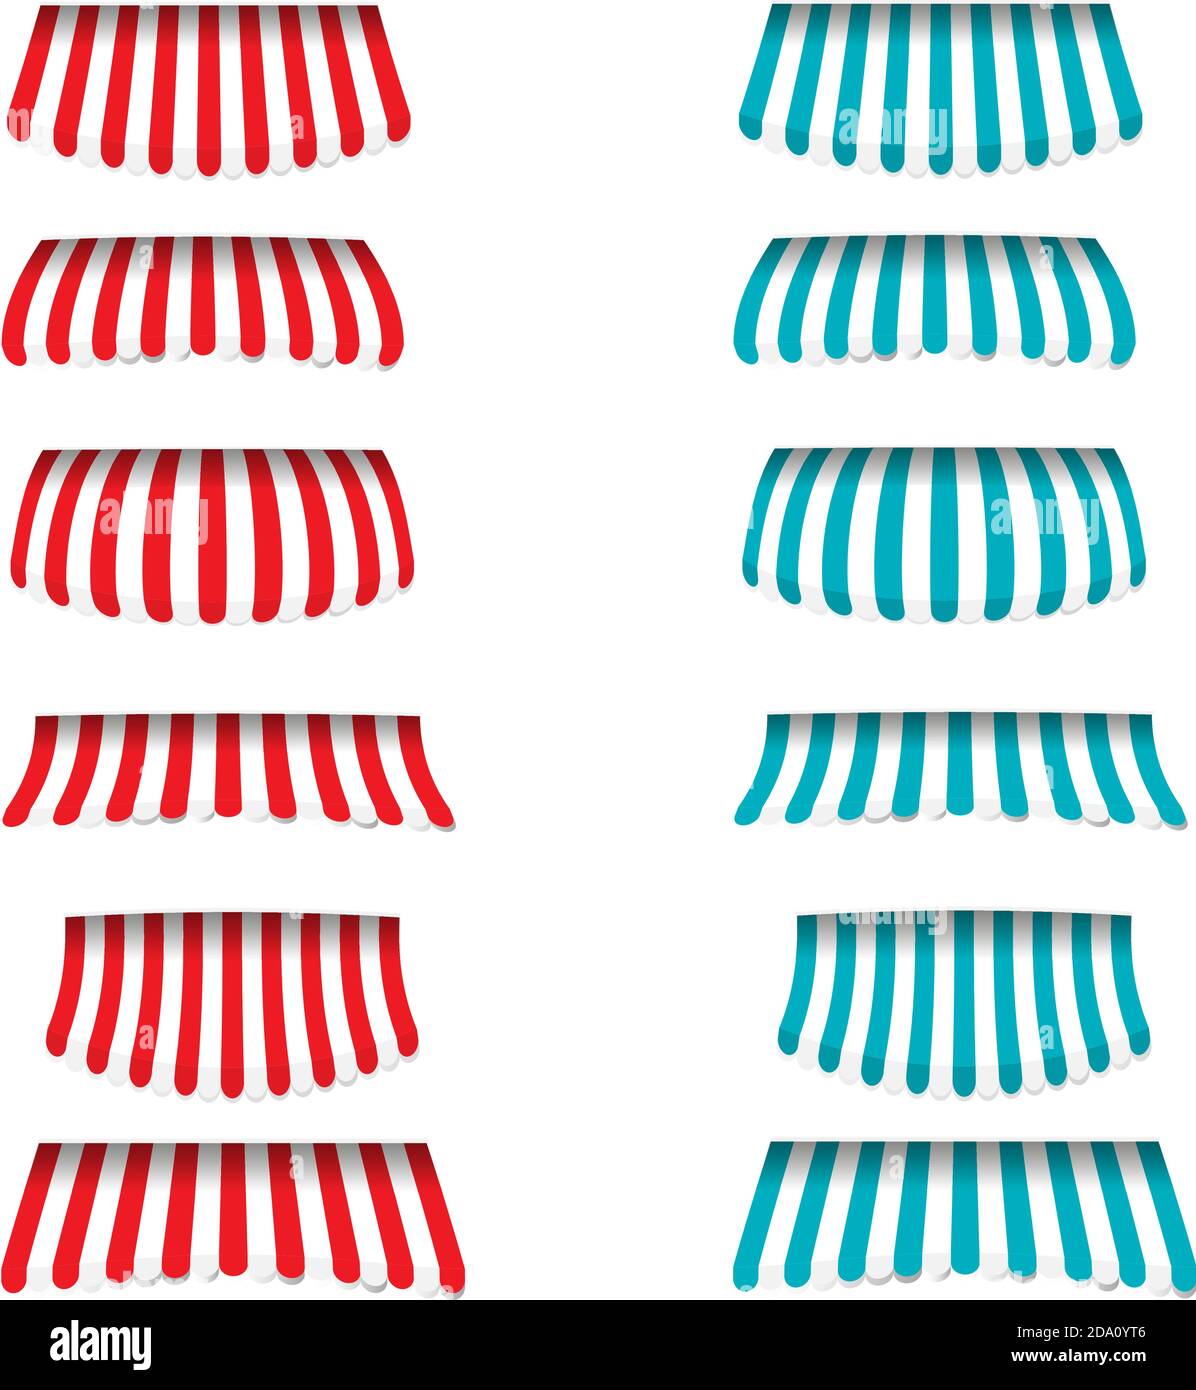 Striped red, blue, white awnings set various shape for shops, cafes and street restaurants, isolated on white background. Vector cartoon illustration. Stock Vector